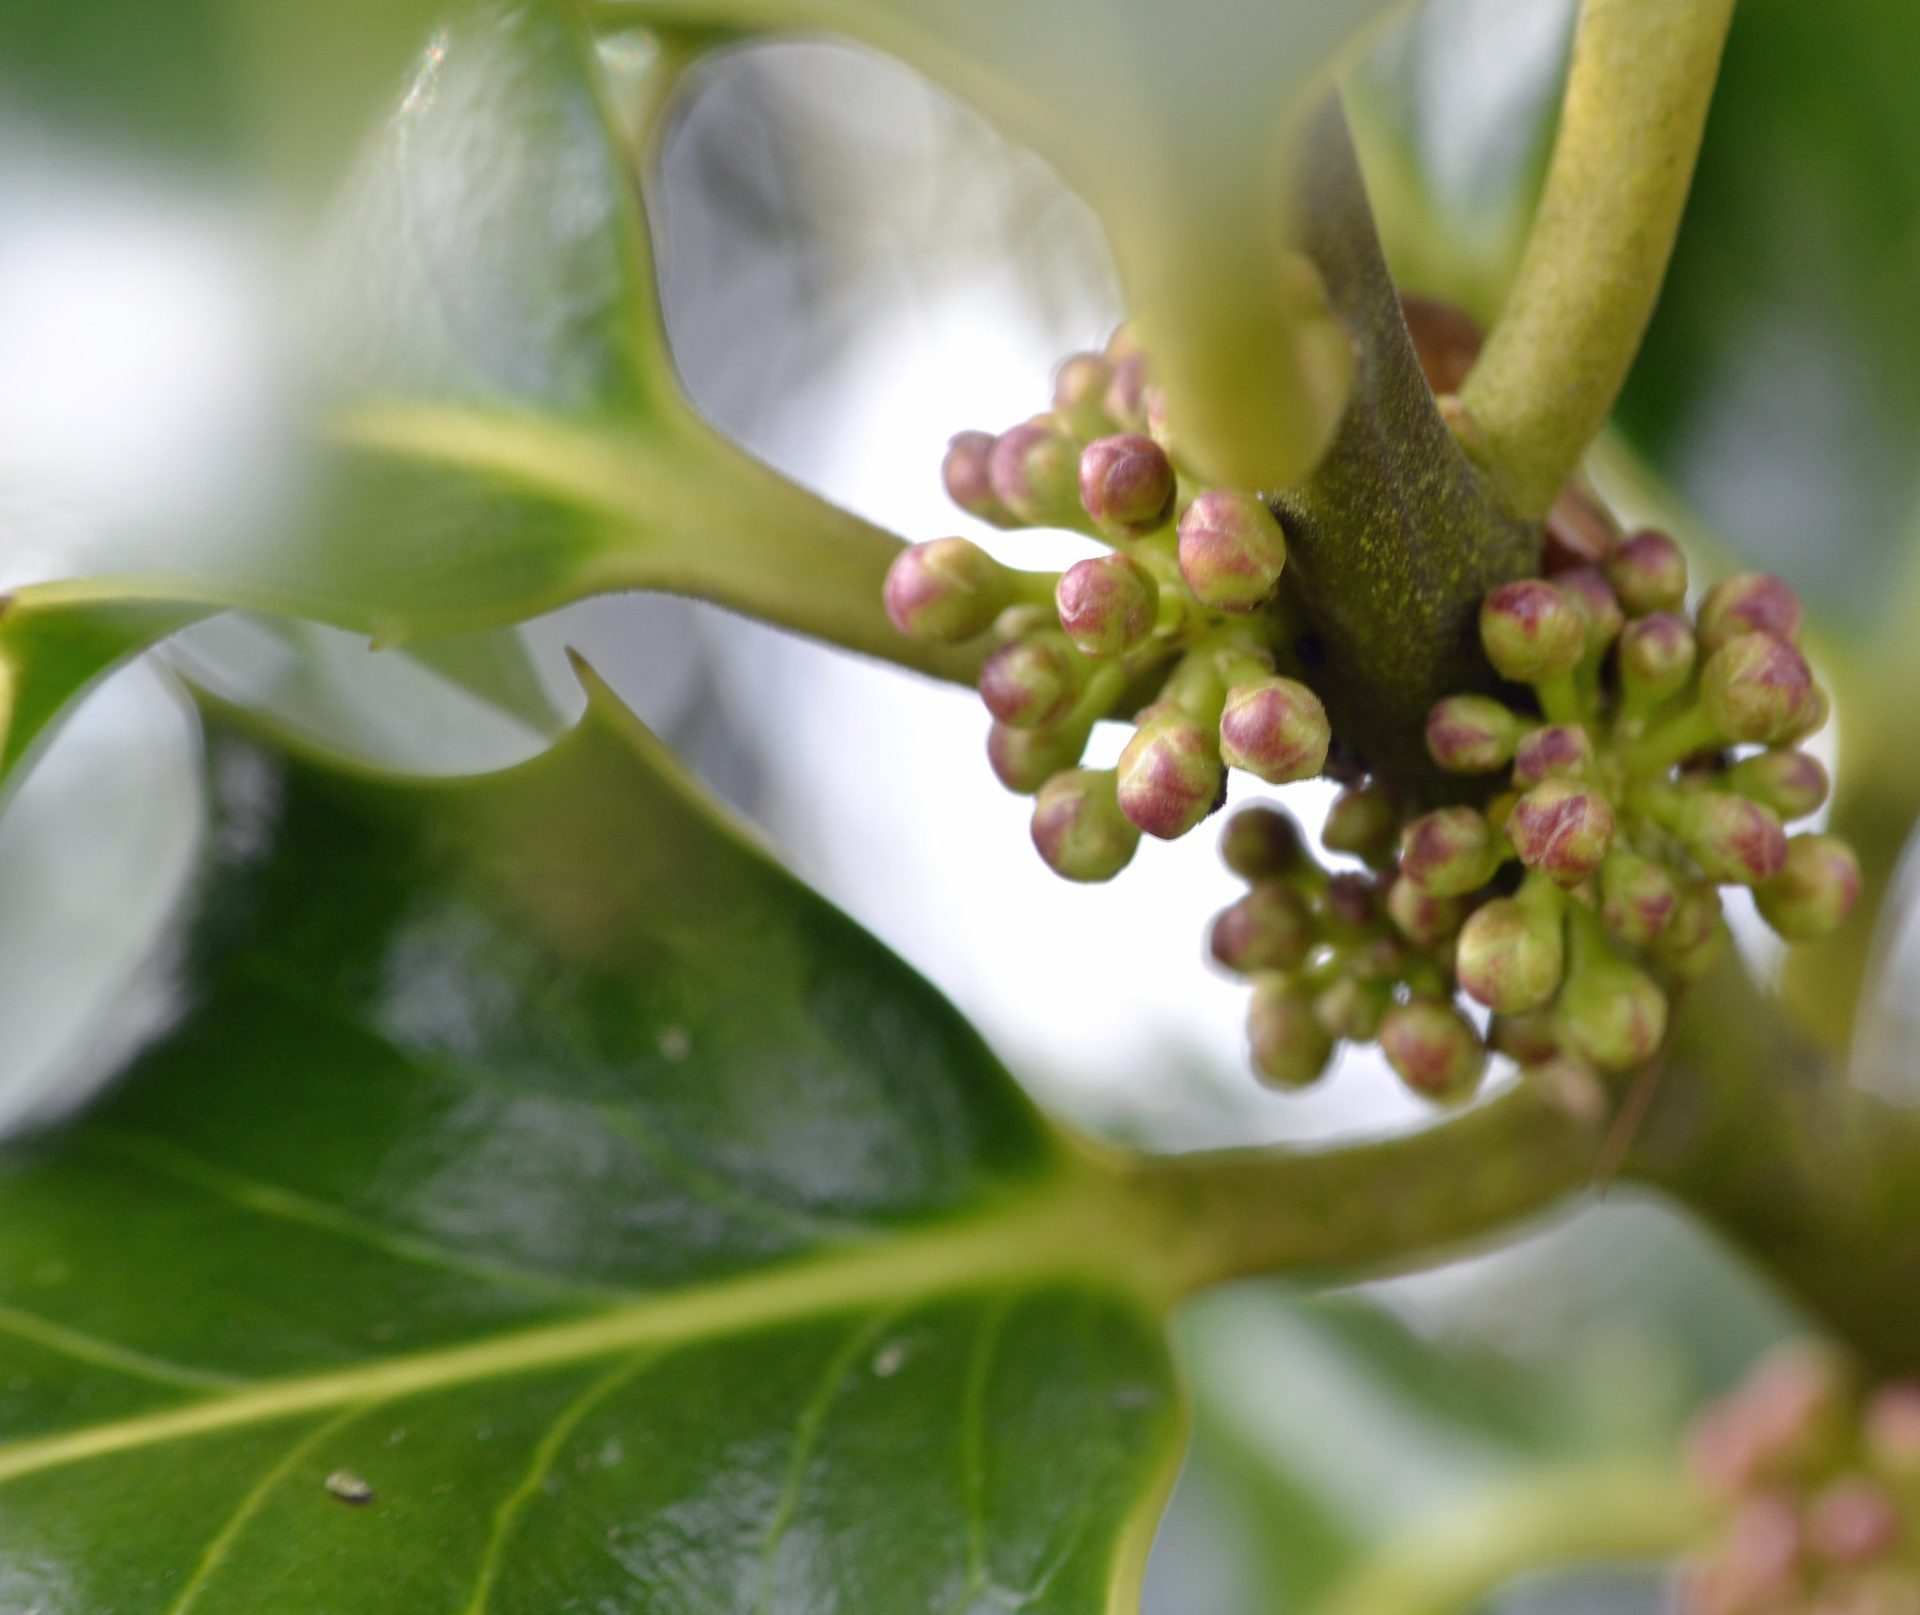 A close up of Holly flower buds